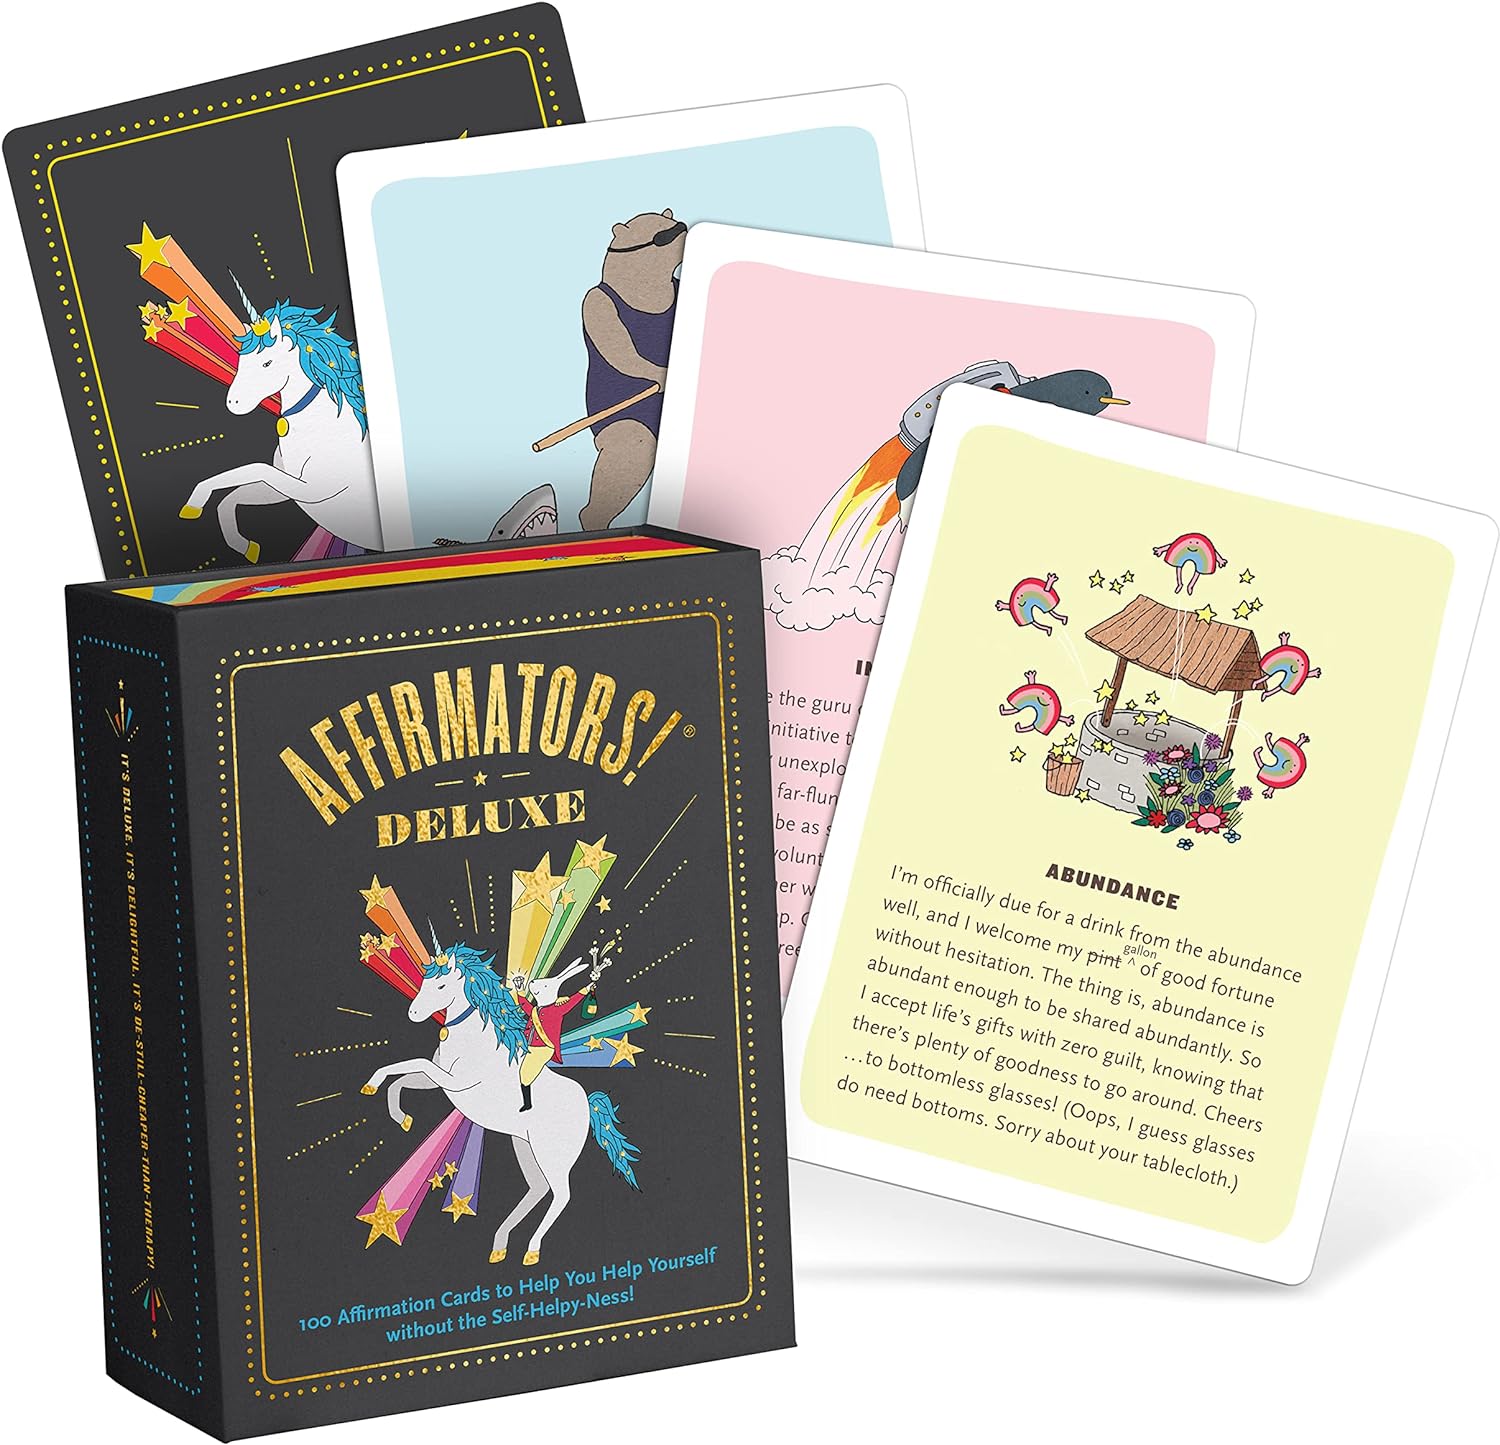 Knock Knock Affirmators! Deluxe Deck: 100 Affirmation Cards Deck - Affirmation Cards to Help You Help Yourself Without The Self-Helpy-Ness